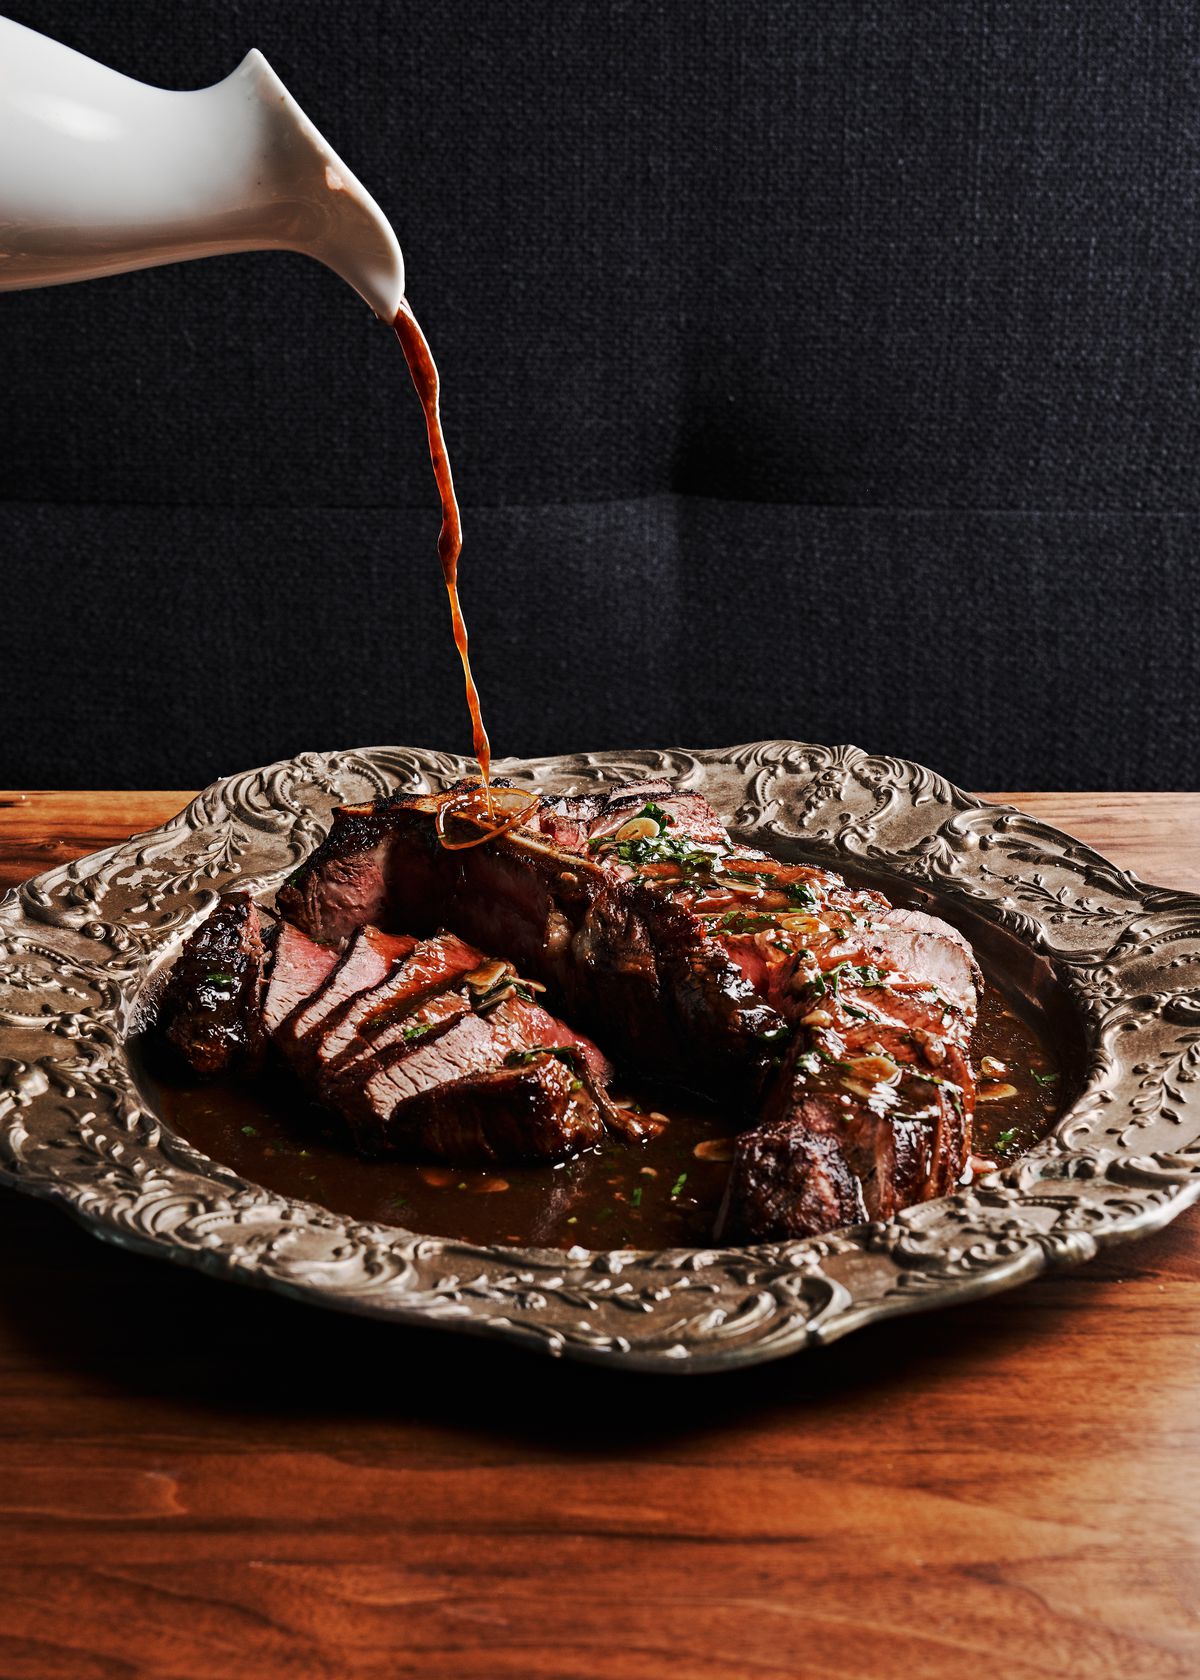 A silver platter with a sliced porterhouse steak topped with herbs and sauce